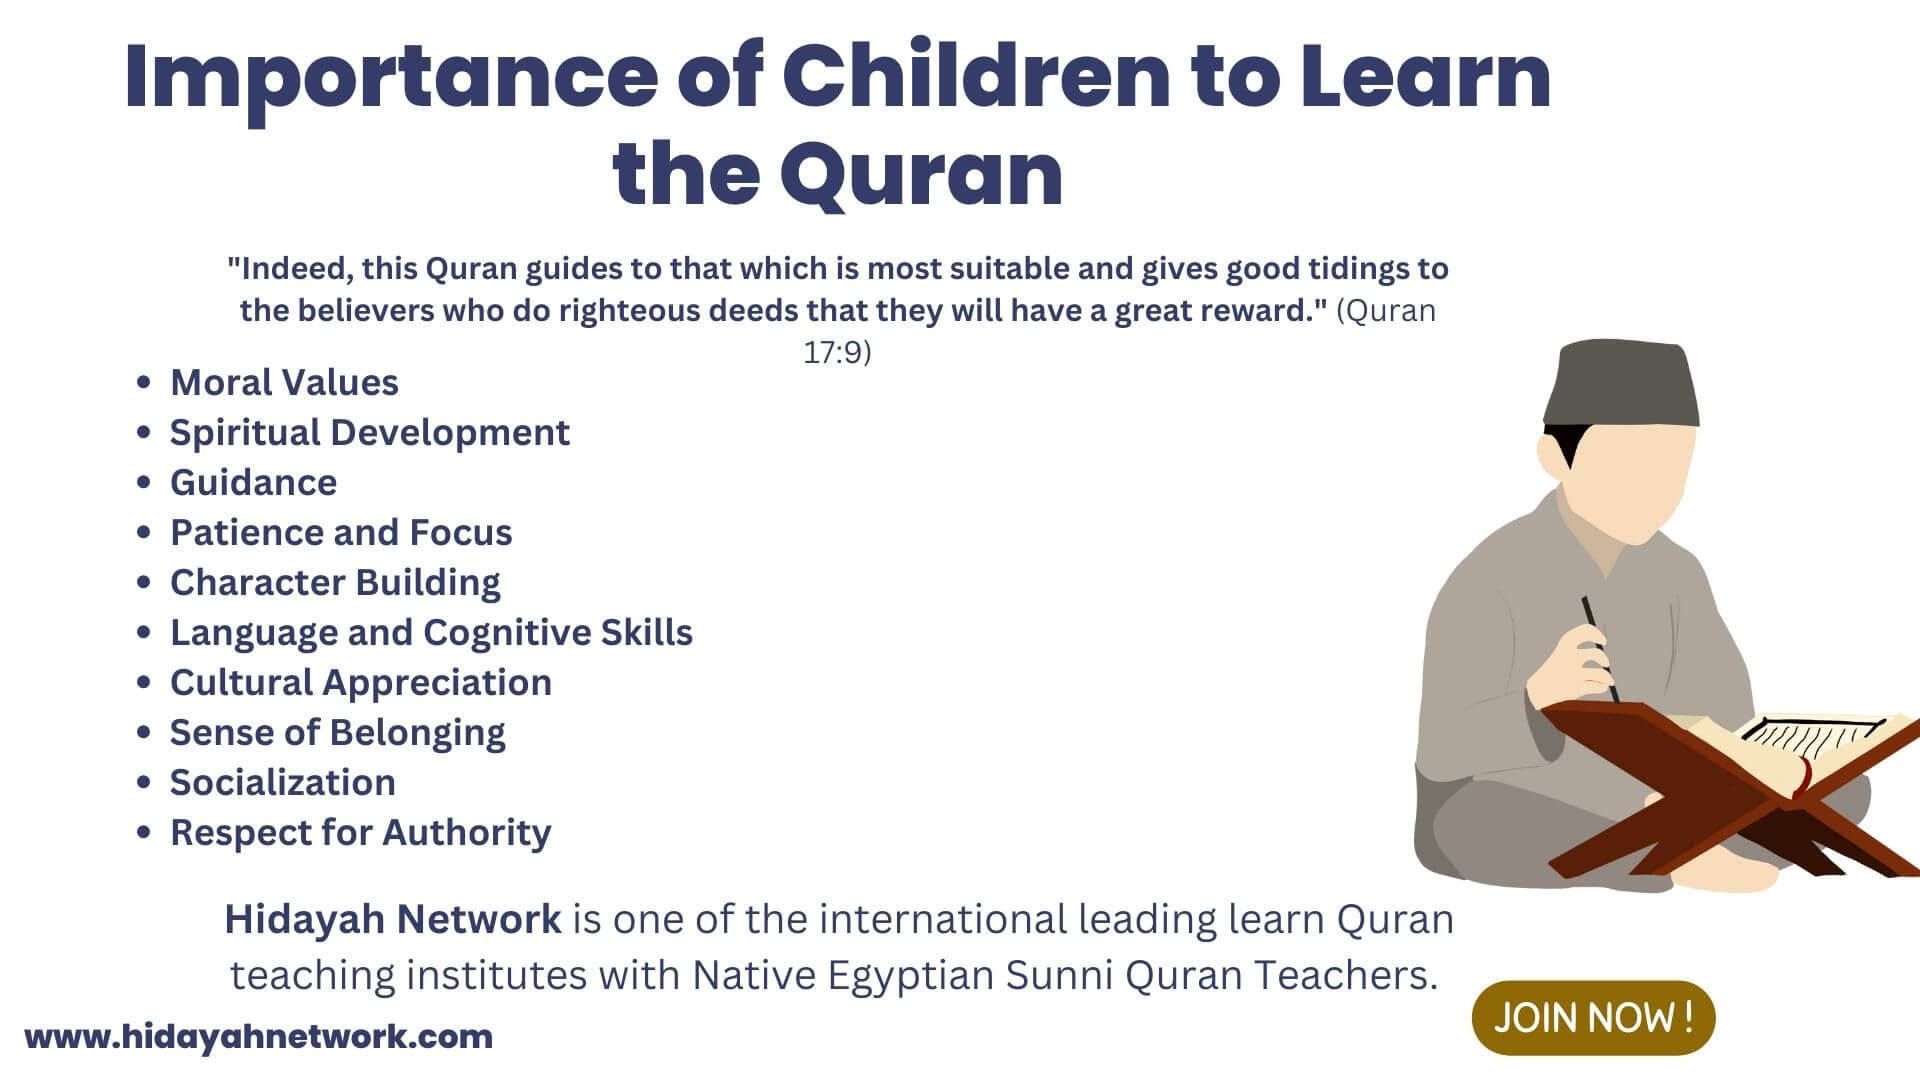 Importance of Children to Learn the Quran